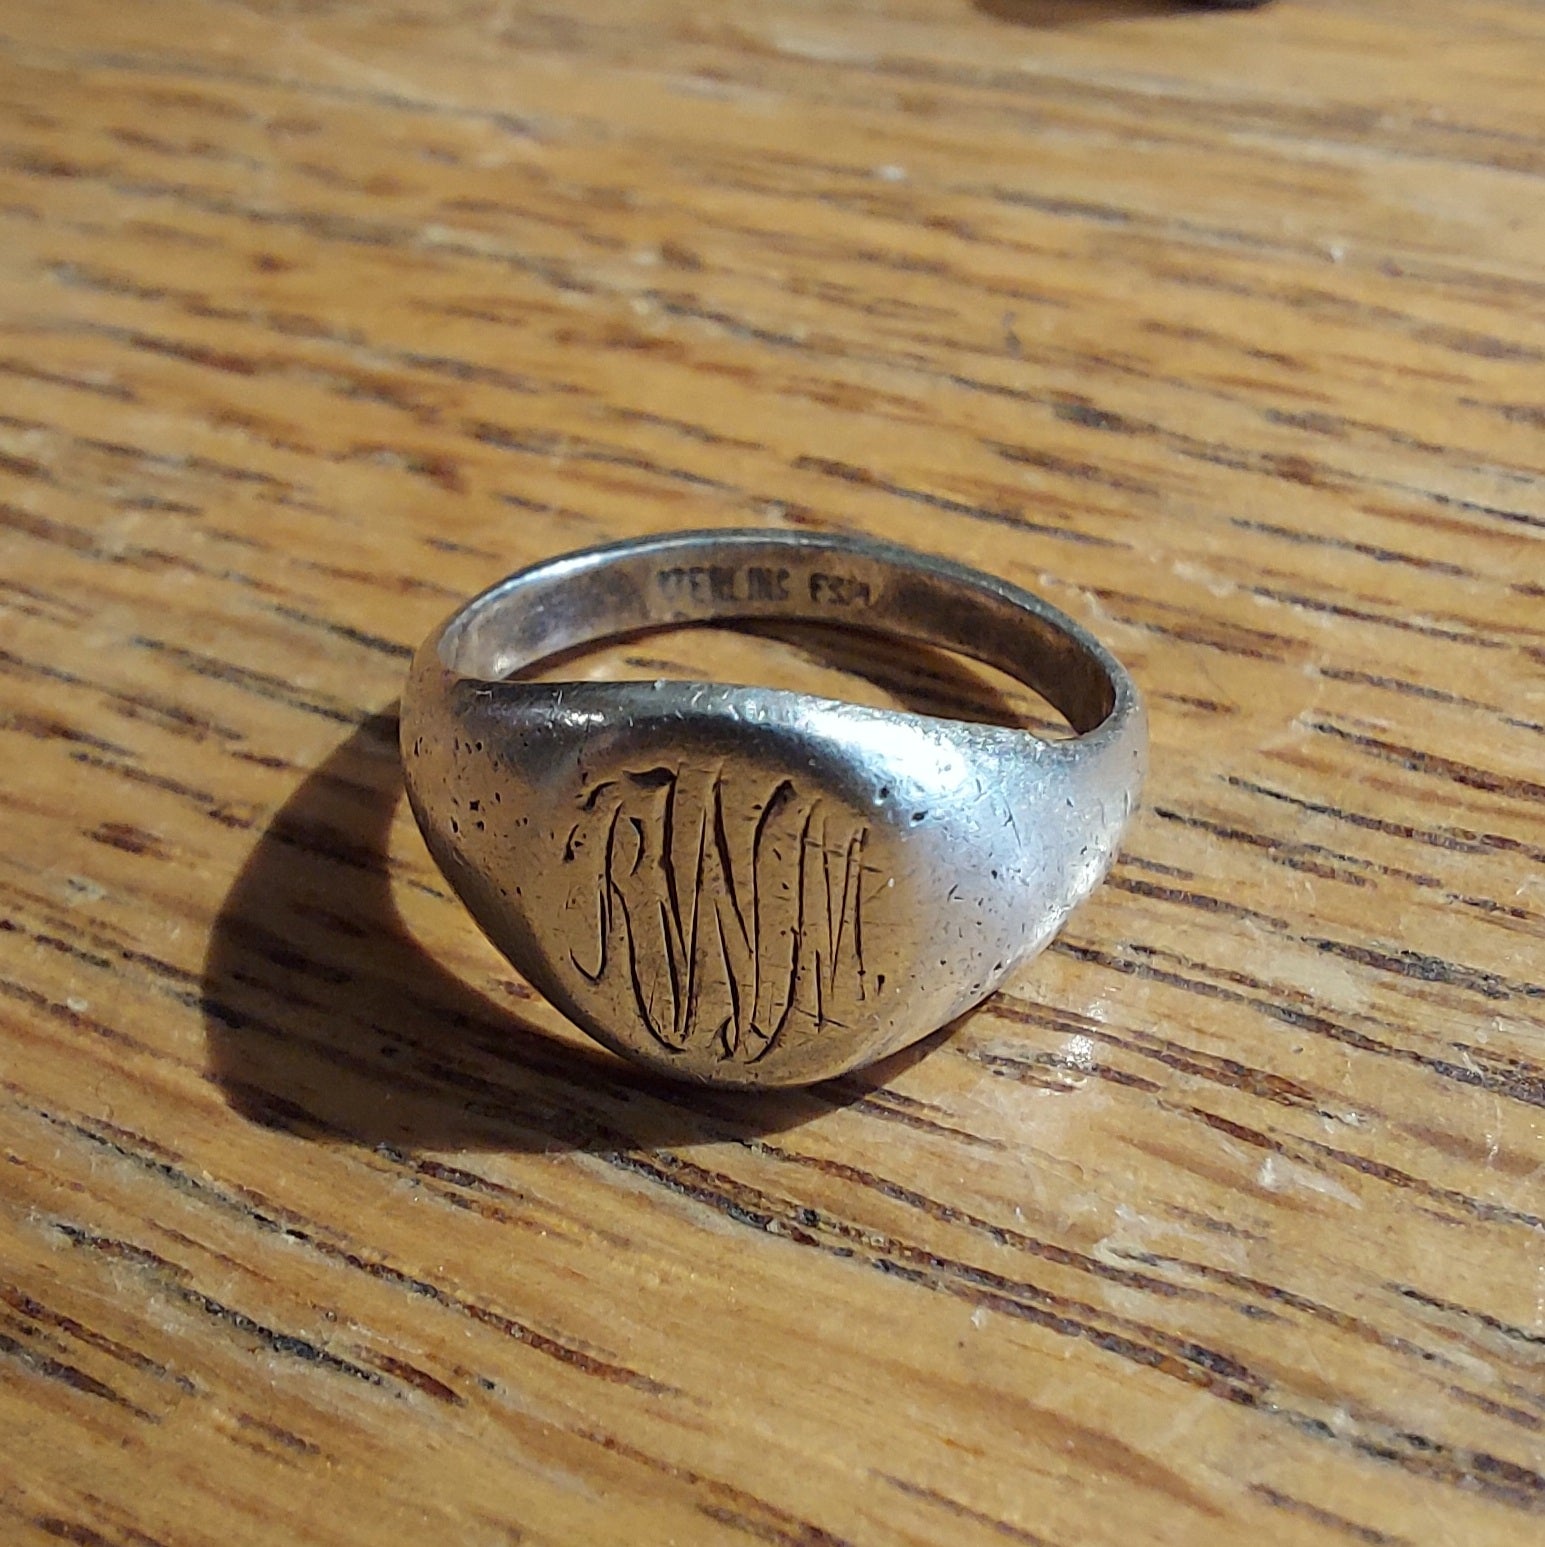 Metal Detectorist Finds Mother's Silver Monogrammed Ring 50 Years Later